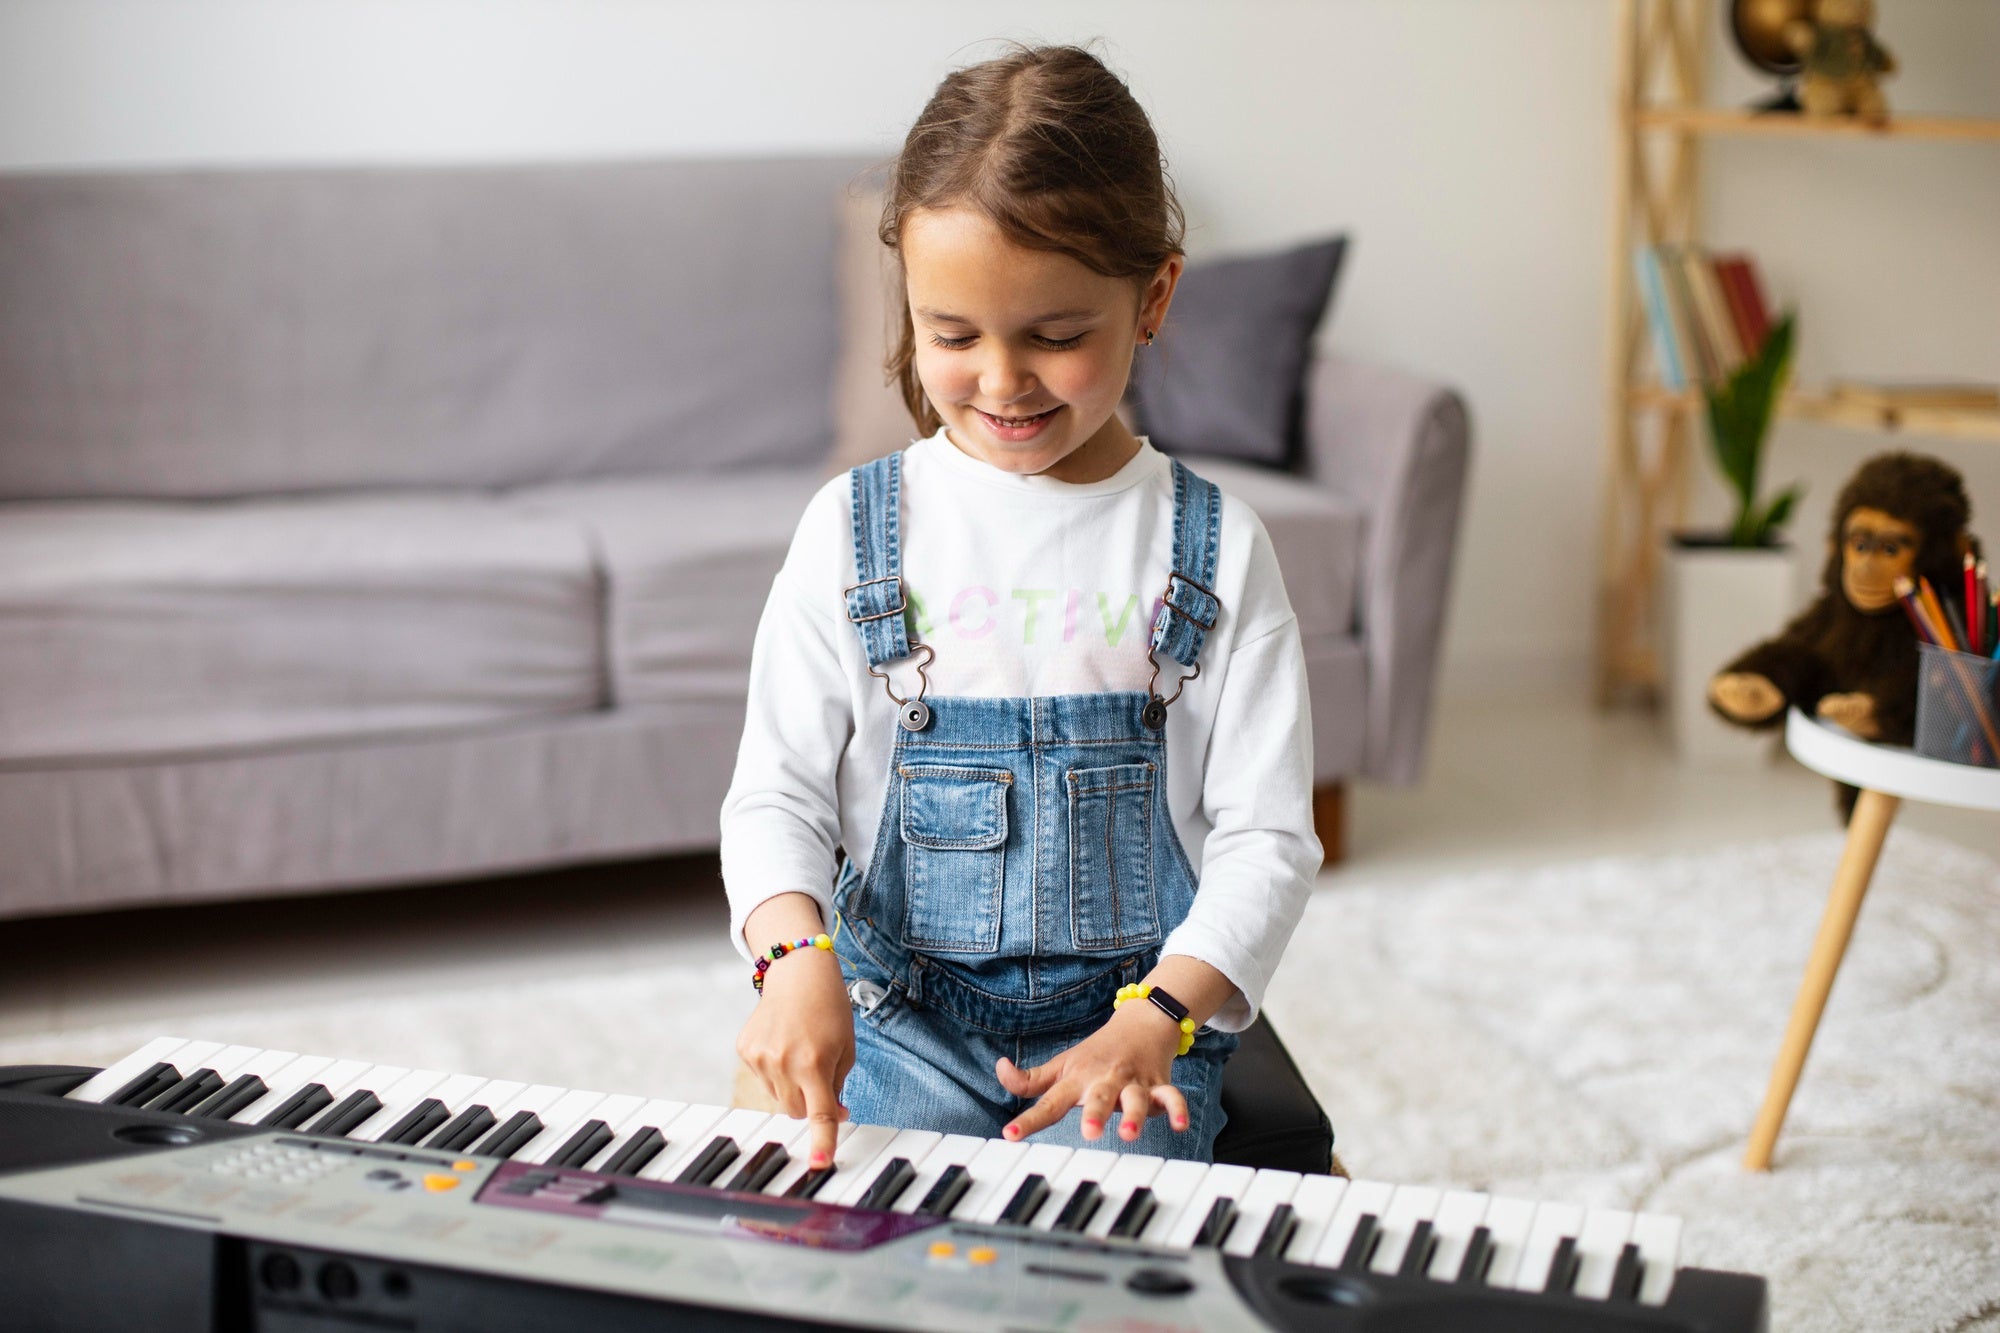 The benefits of piano lessons for children